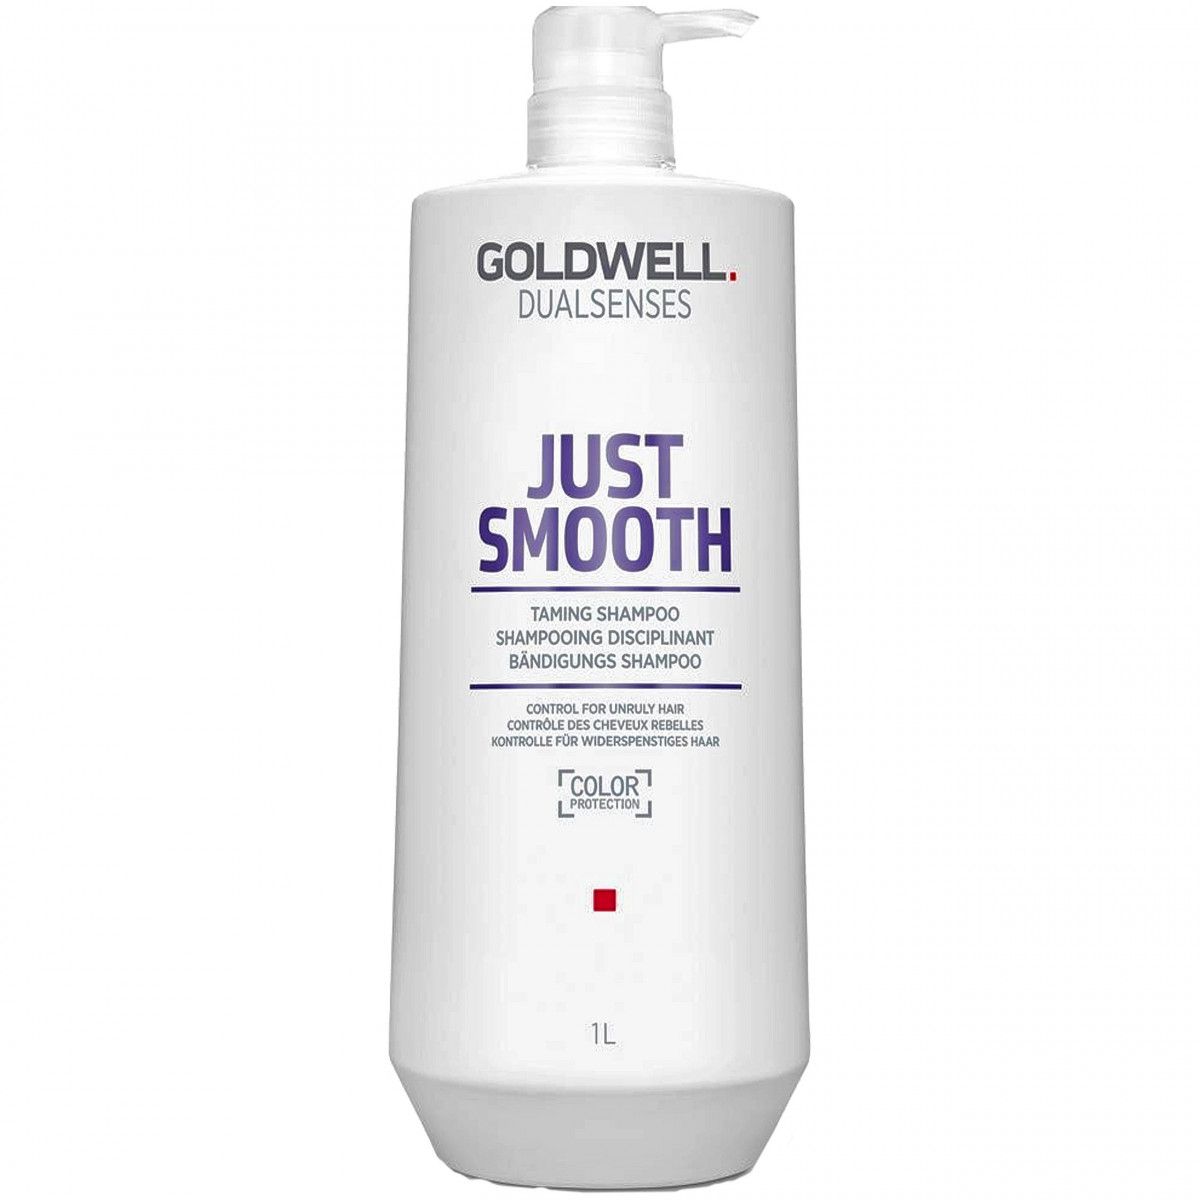 goldwell just smooth szampon opinie